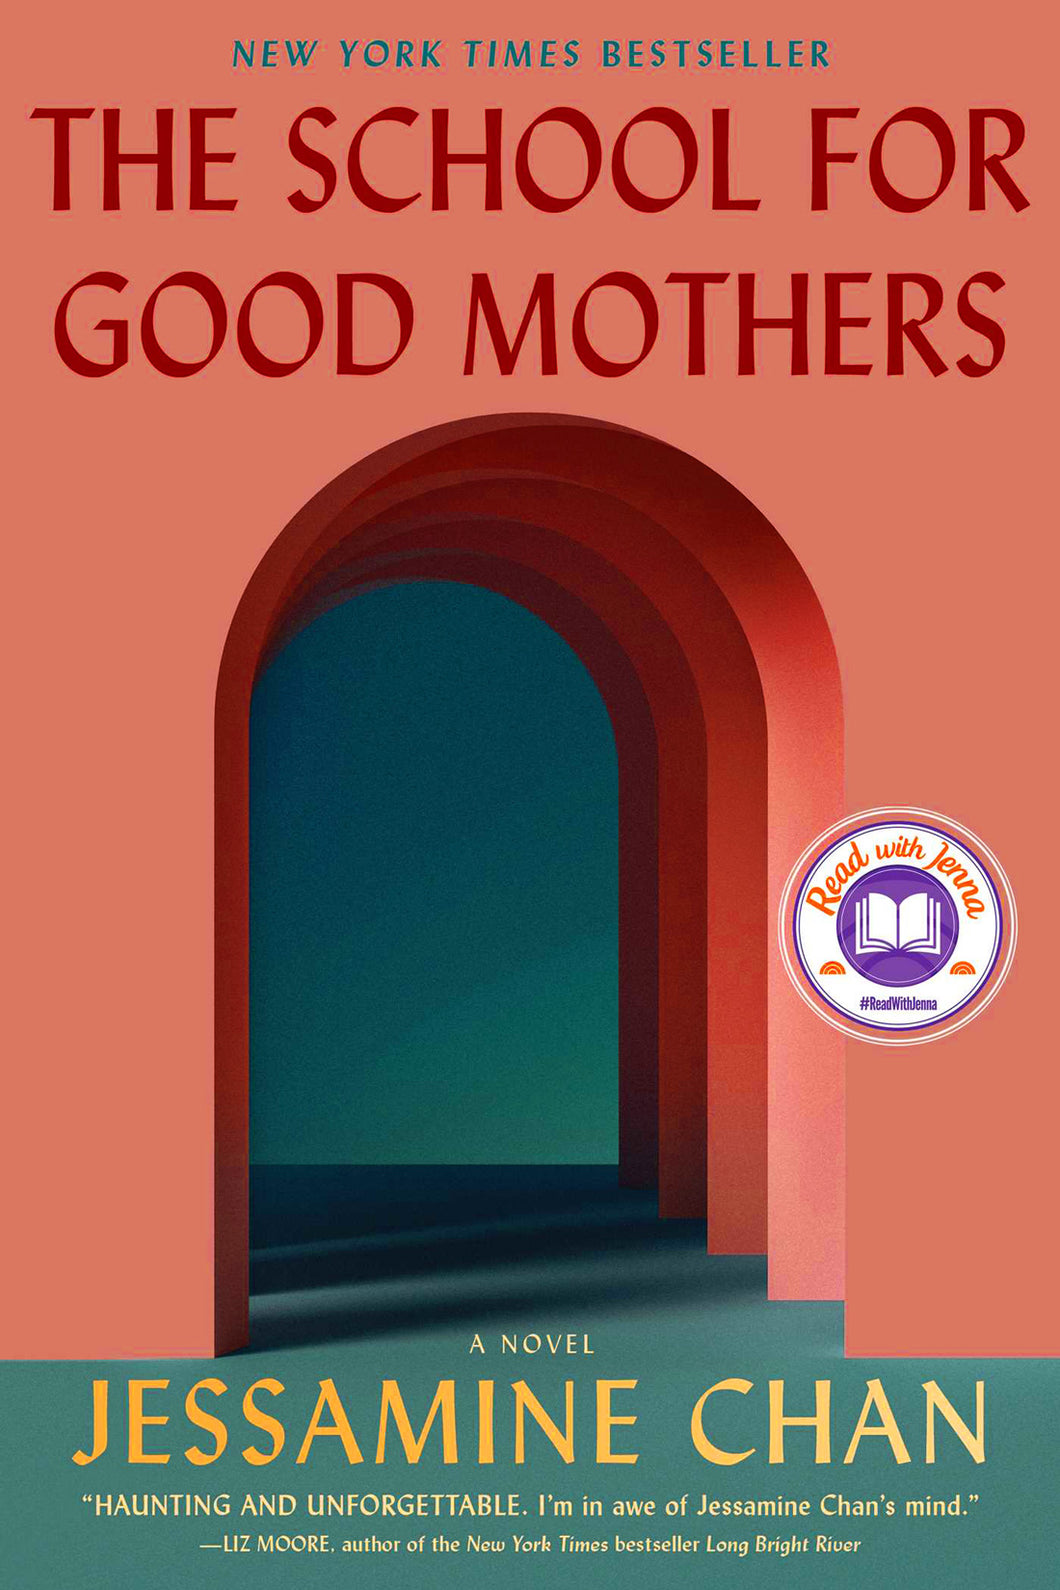 The School for Good Mothers by Jessamine Chan / Hardcover or Paperback - NEW BOOK OR BOOK BOX